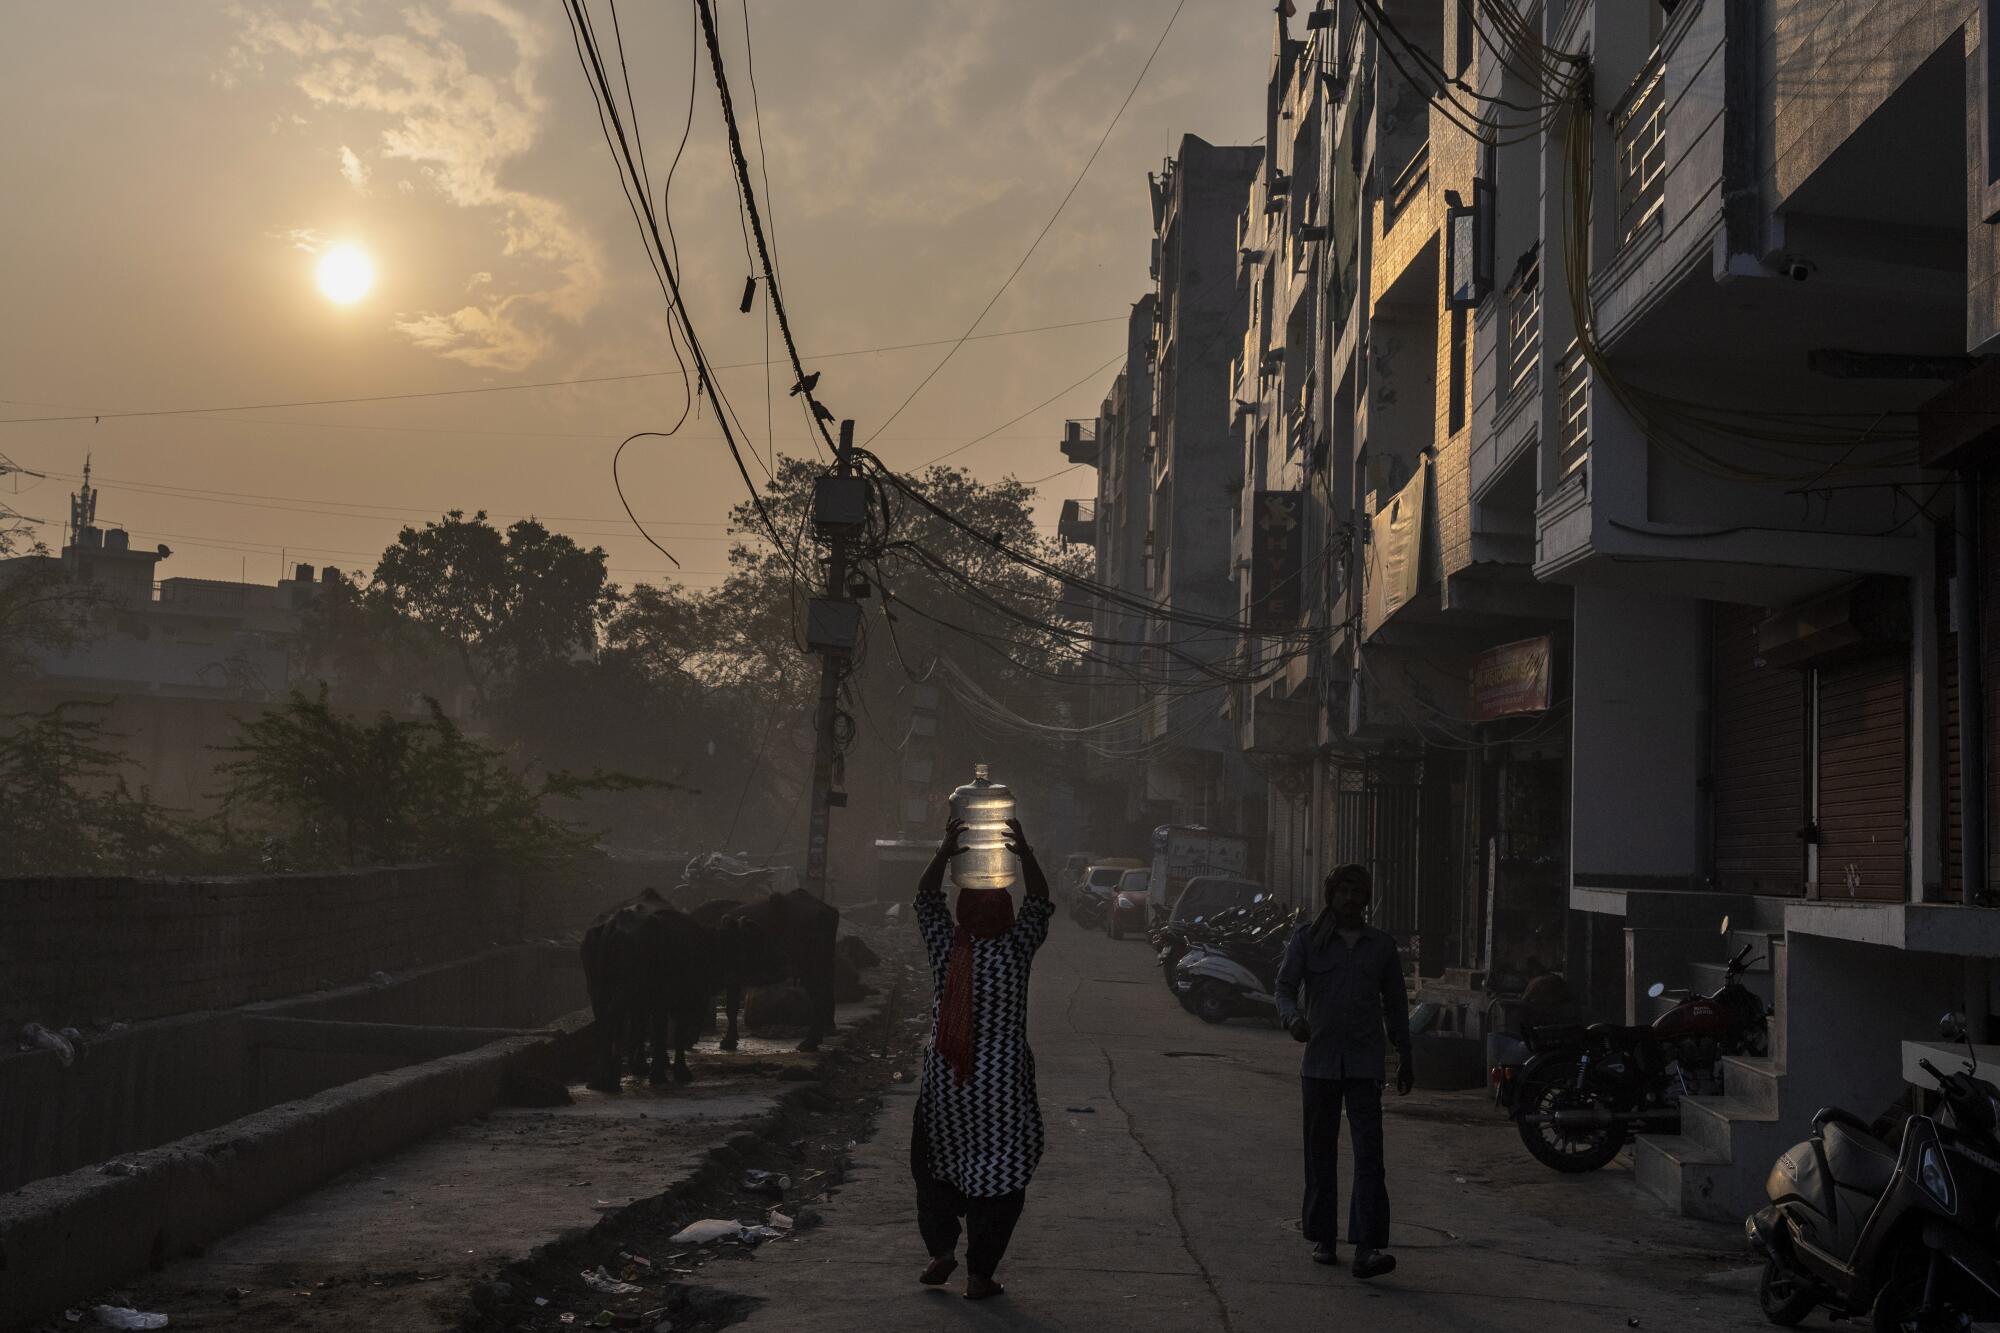 A woman carries a jug on her head in a residential area of India.